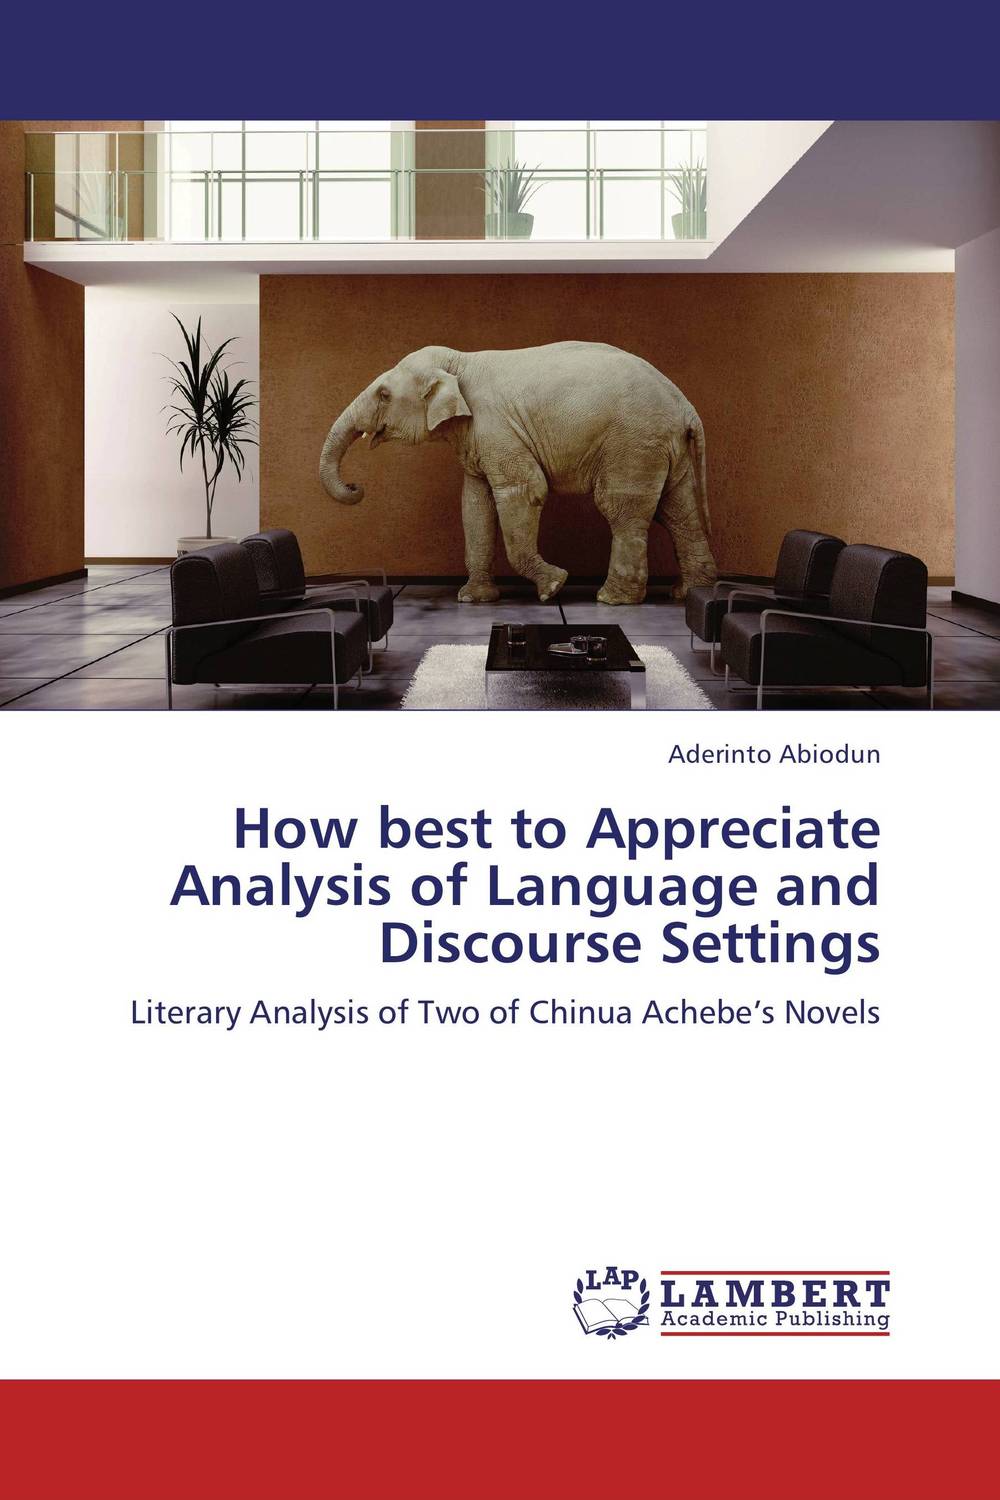 How best to Appreciate Analysis of Language and Discourse Settings